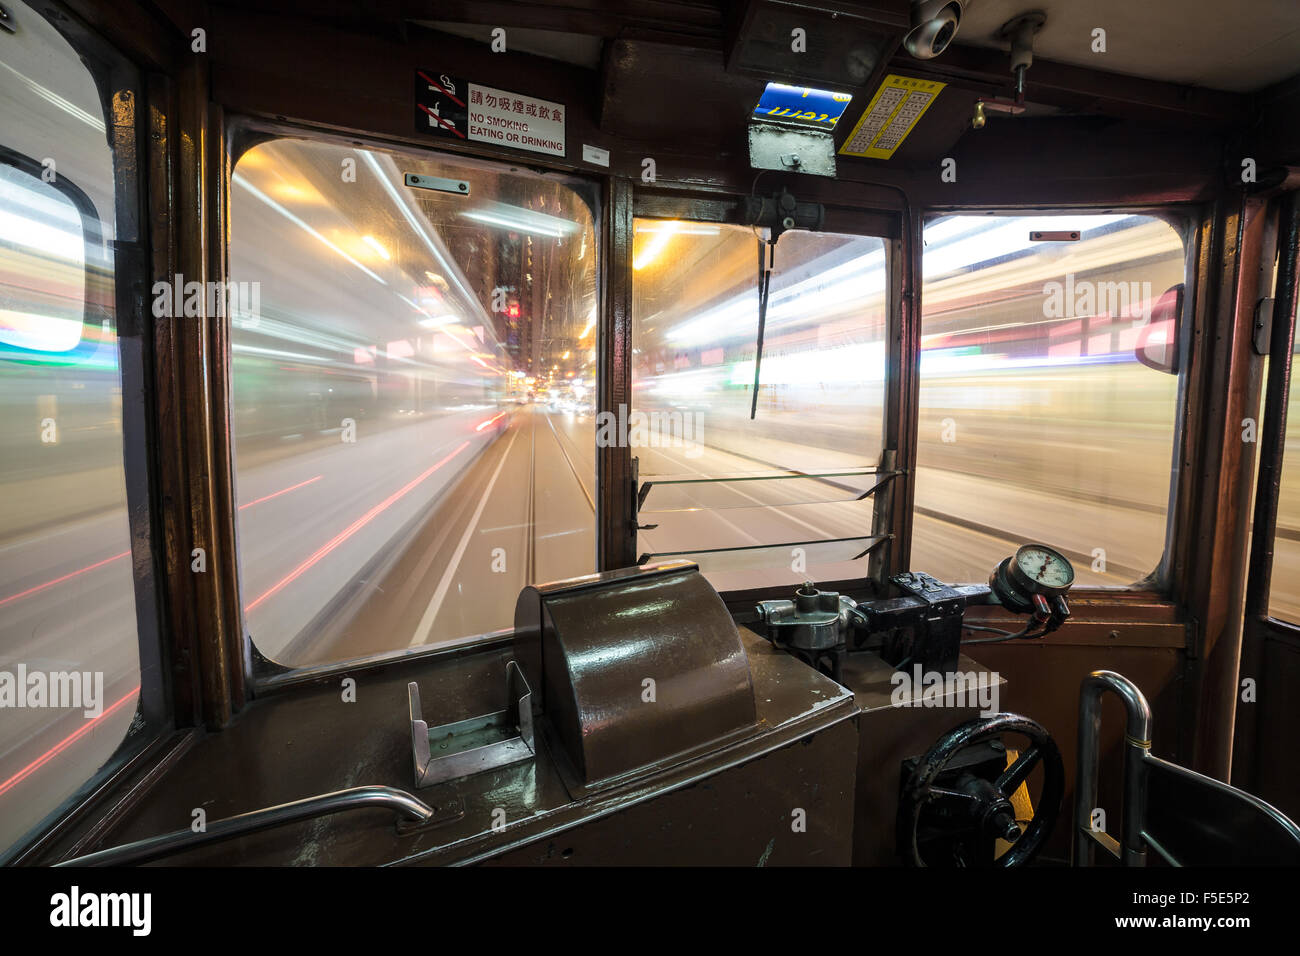 Inside a Tram car rushing through Hong Kong island streets at night. WIde angle and long exposure are used. Stock Photo